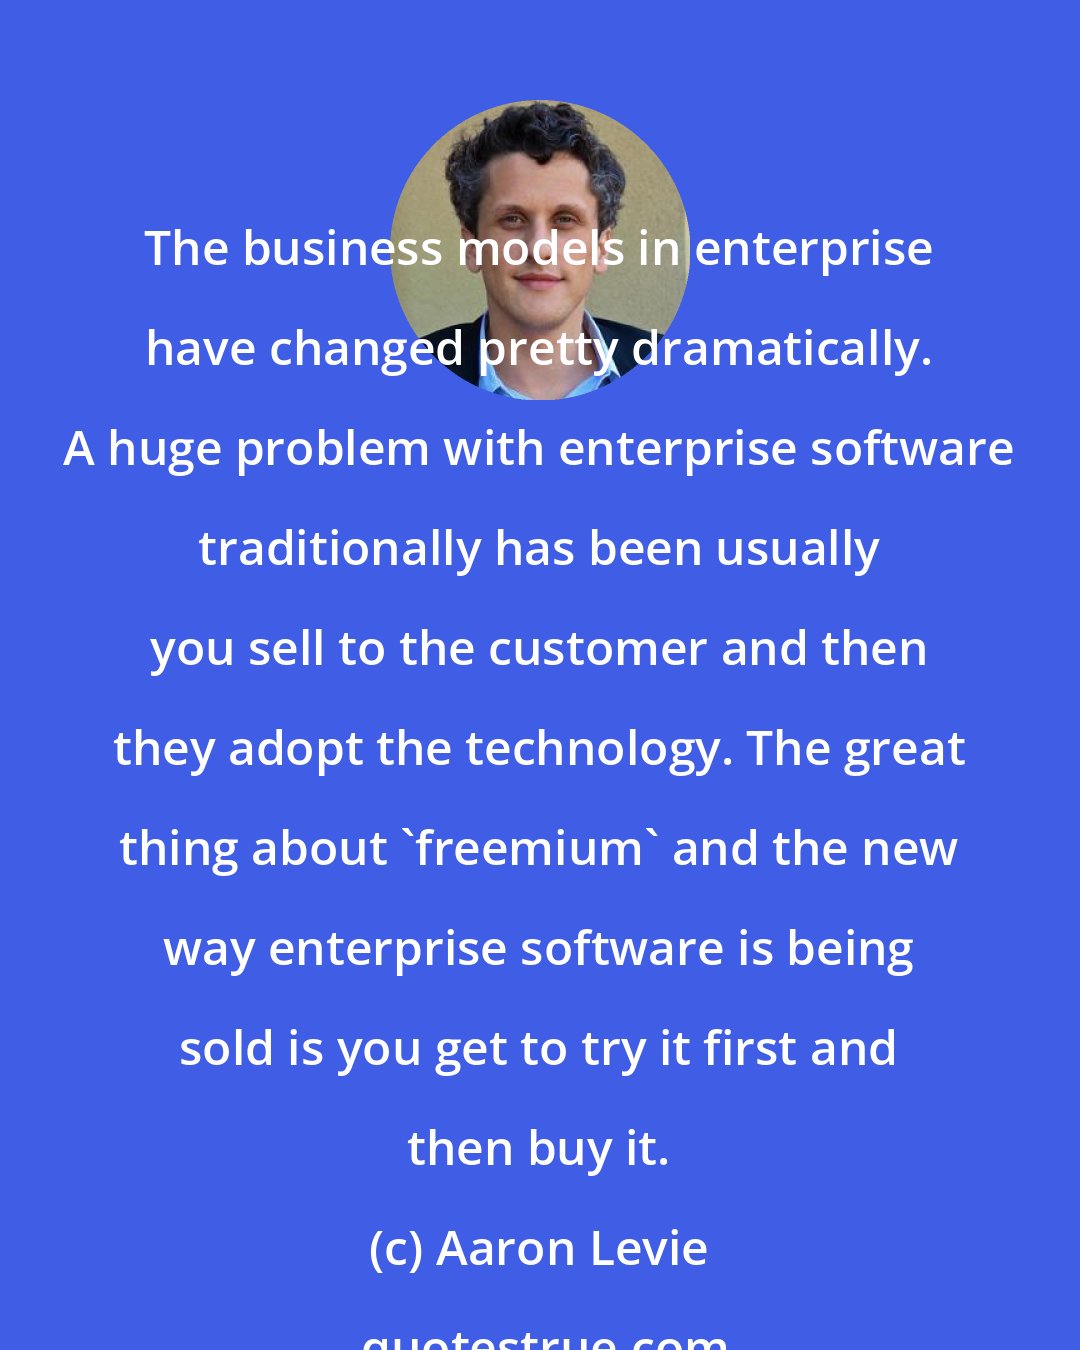 Aaron Levie: The business models in enterprise have changed pretty dramatically. A huge problem with enterprise software traditionally has been usually you sell to the customer and then they adopt the technology. The great thing about 'freemium' and the new way enterprise software is being sold is you get to try it first and then buy it.